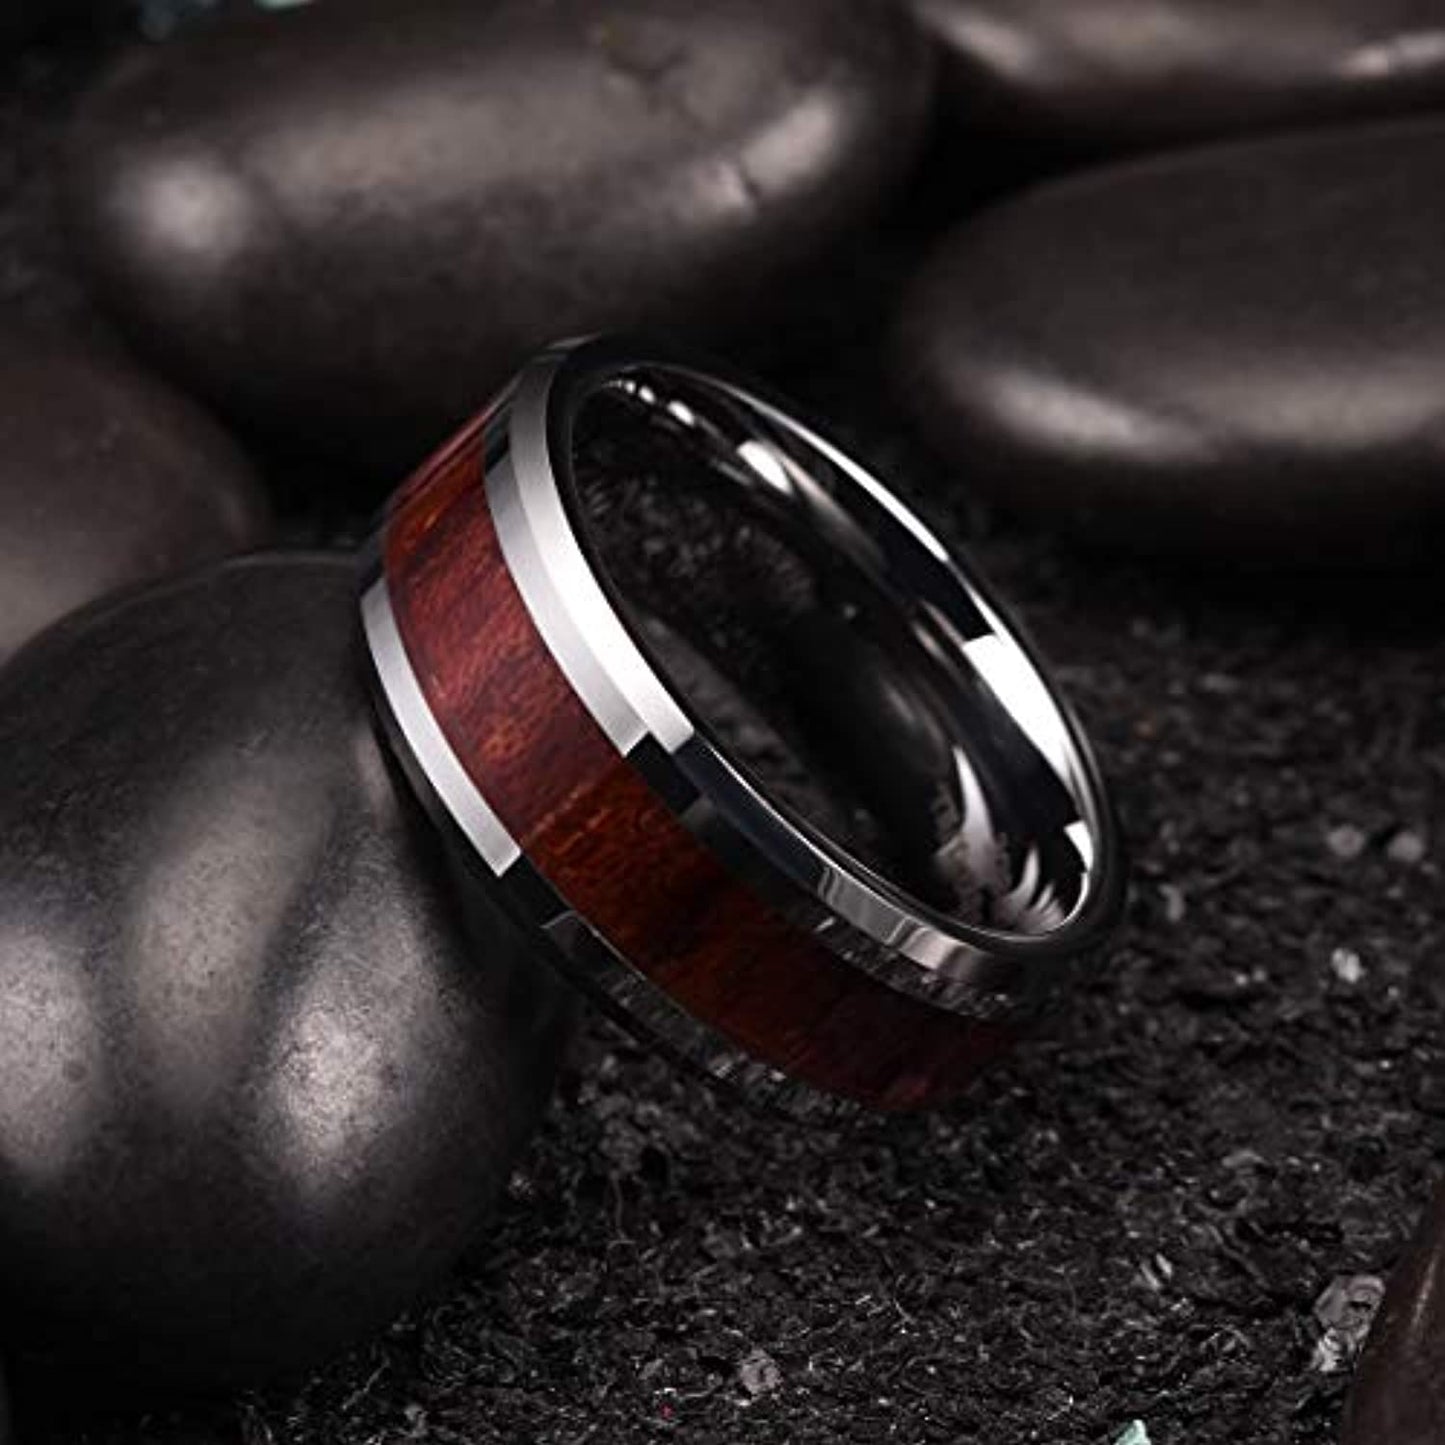 Silver Tungsten Carbide Ring with Koa Wood Inlay | 8mm